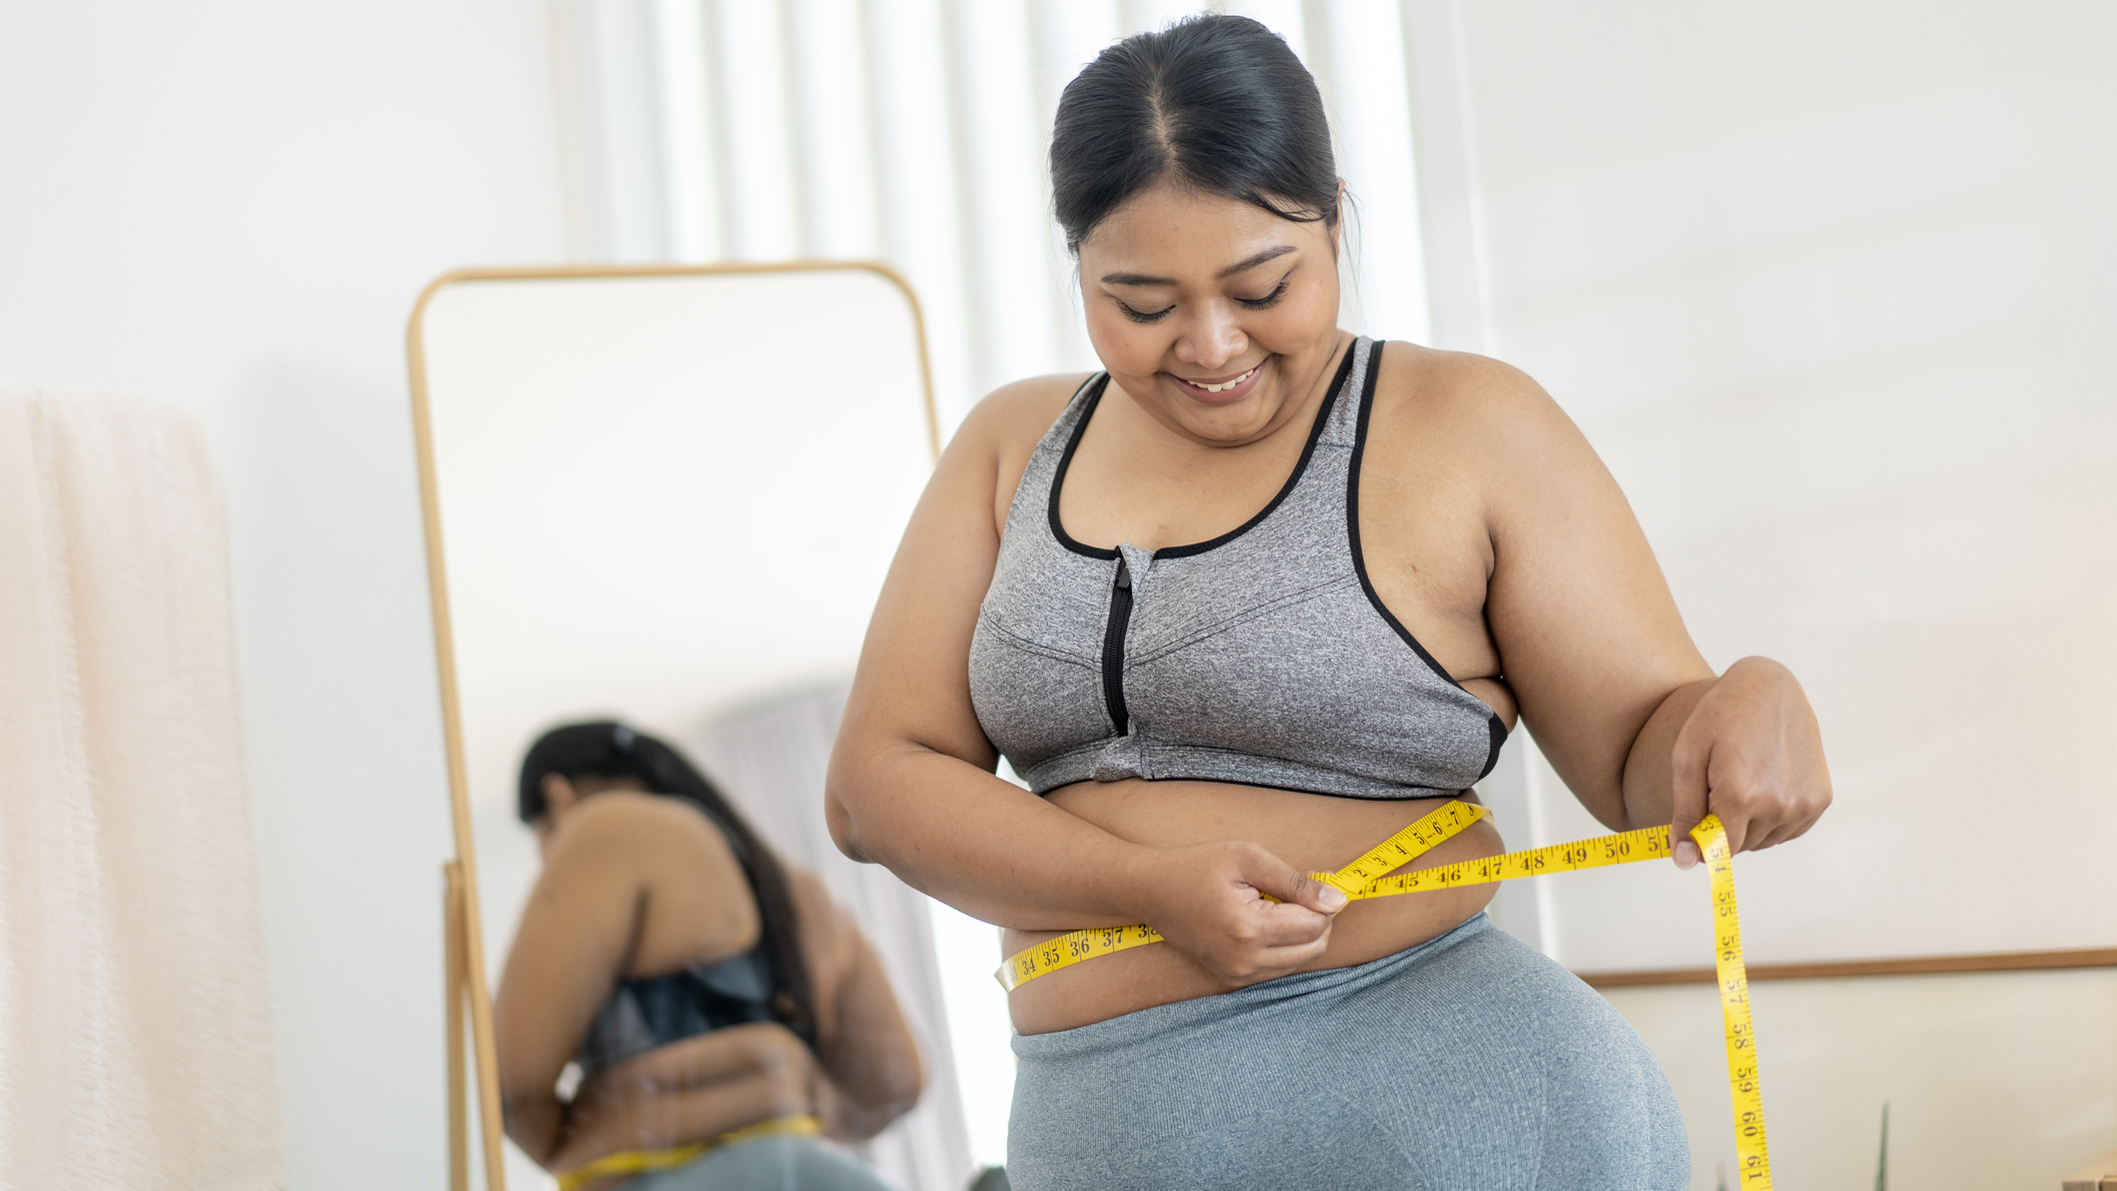 The One Simple Exercise That Can Get You A Slimmer Waistline, Better